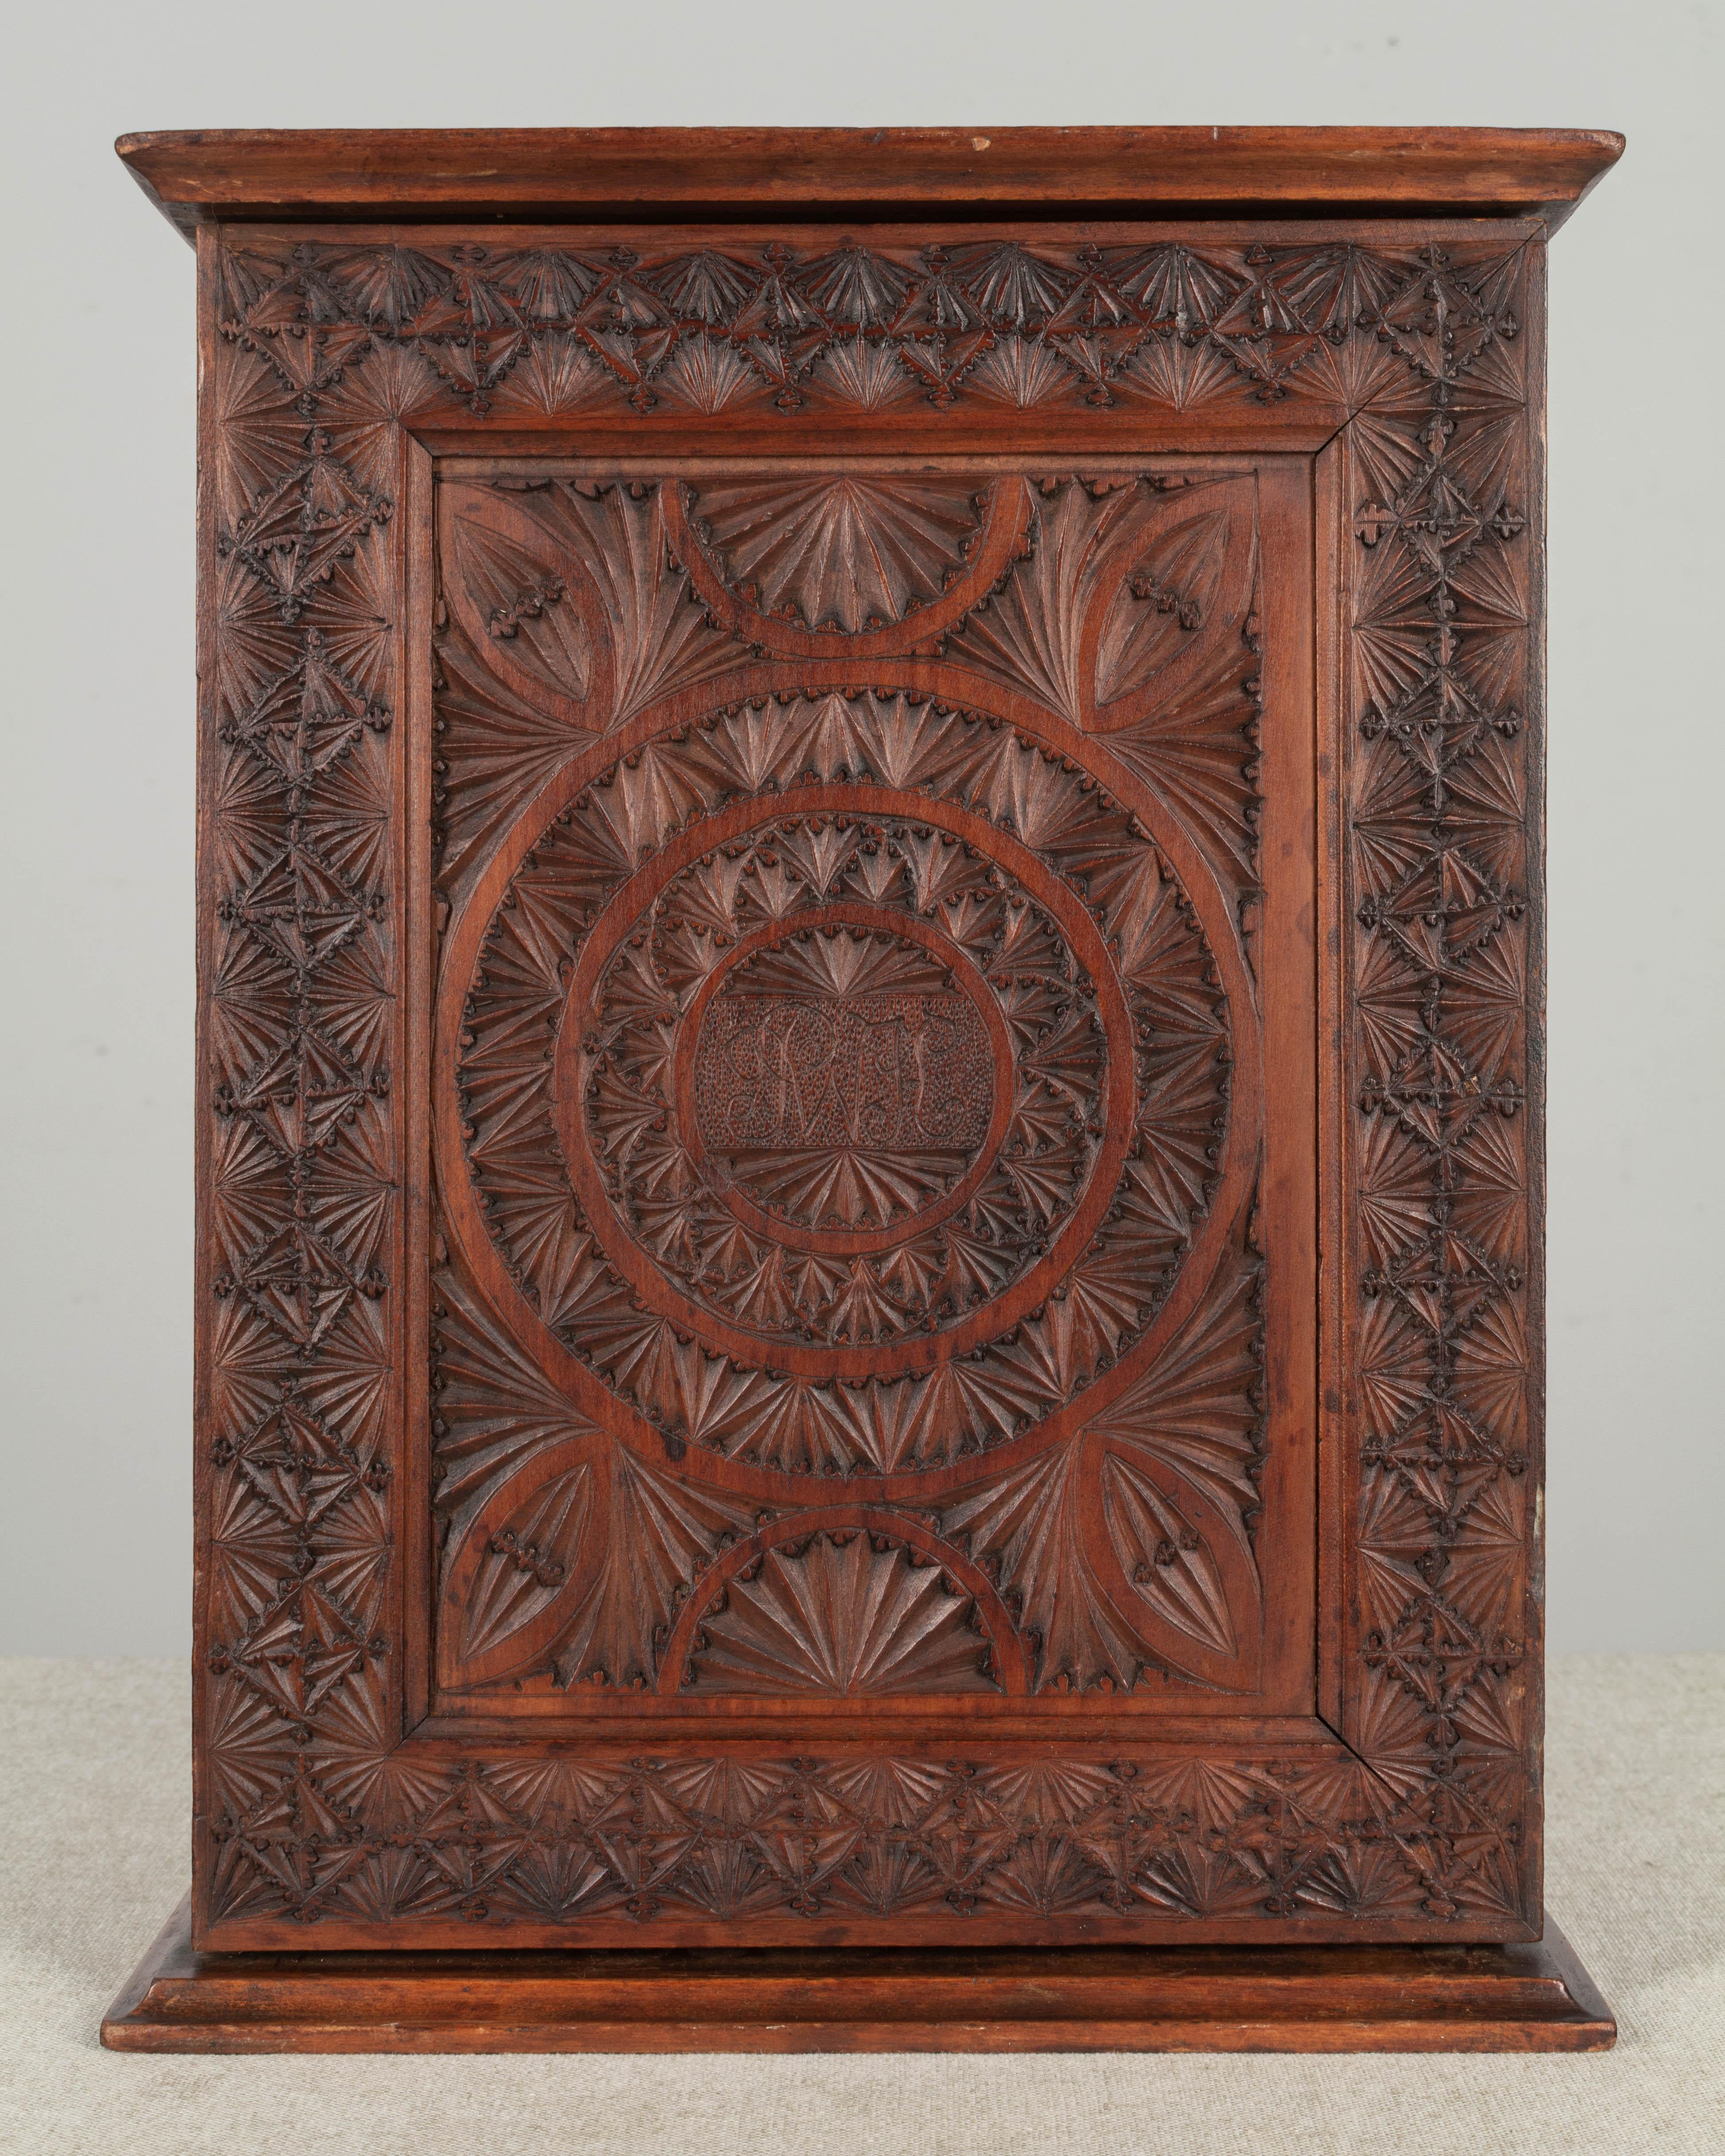 Hand-Carved 19th Century French Carved Wooden Box